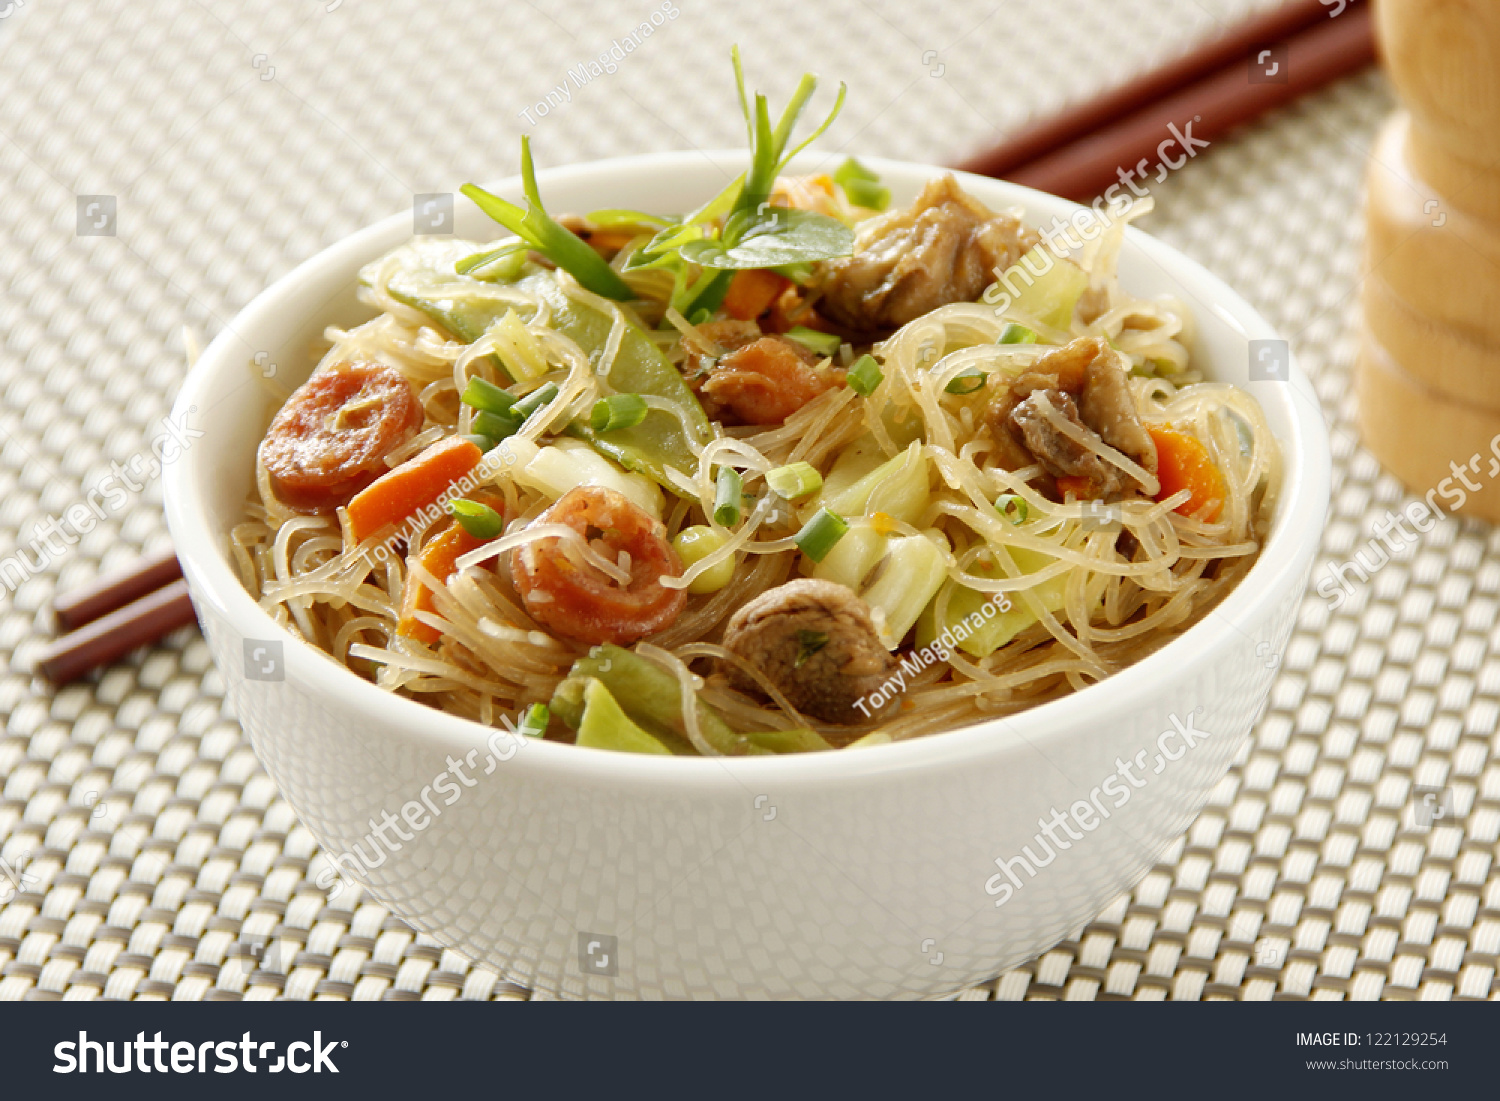 Chopsticks clipart plate rice. Fried noodle pencil and